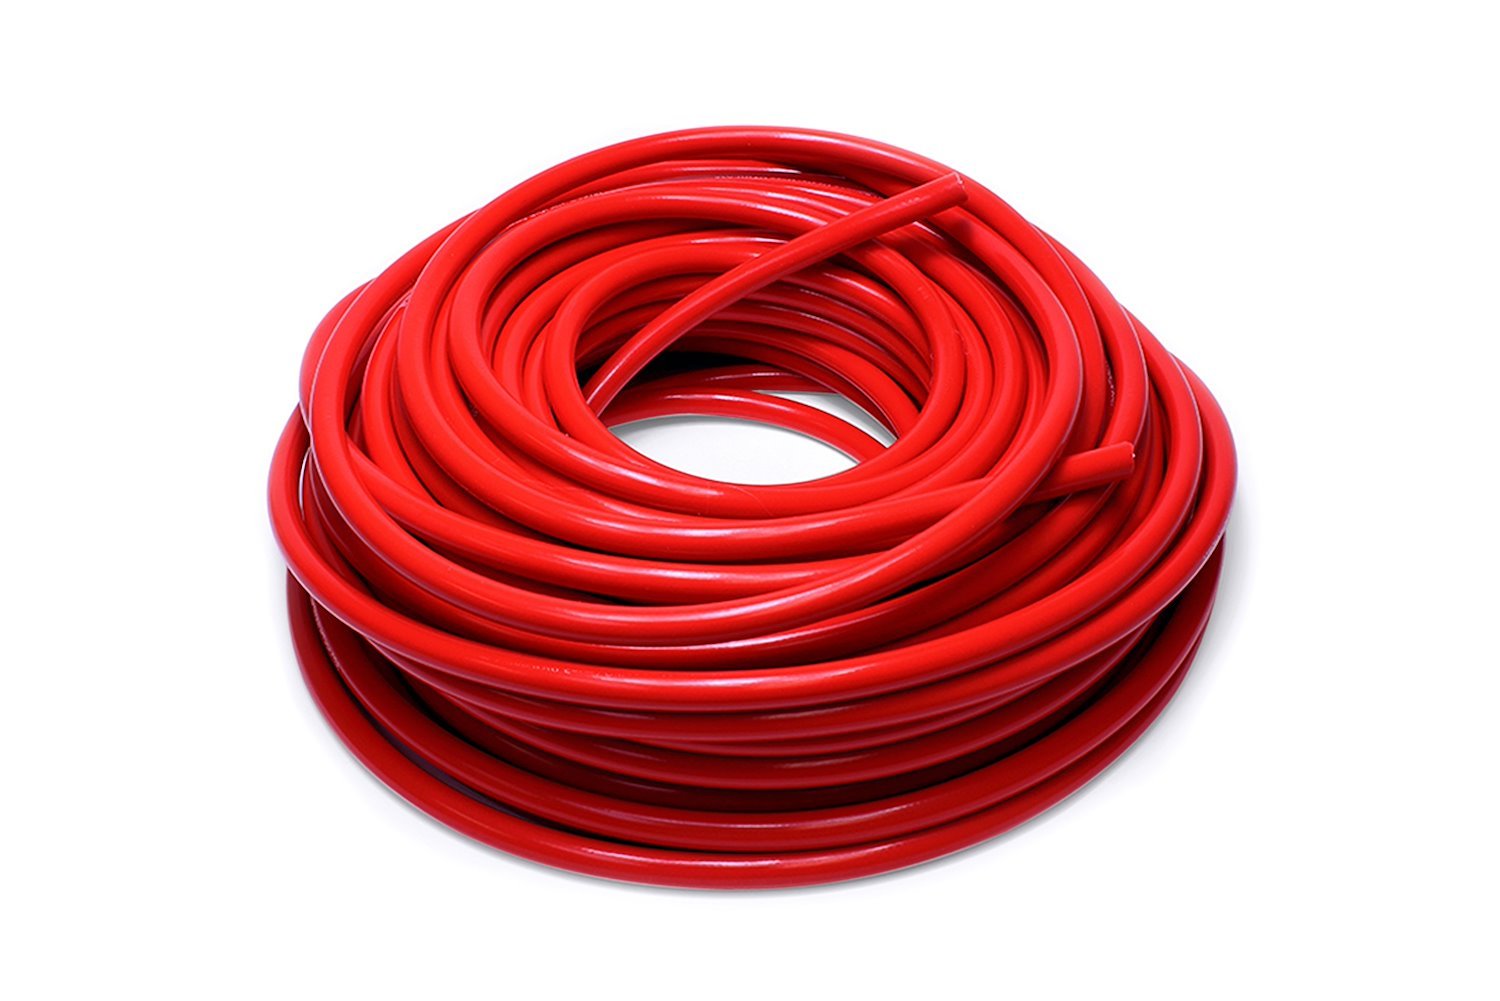 HTHH-100-REDx100 Silicone Heater Hose Tubing, High-Temp 1-Ply Reinforced, 1 in. ID, 100 ft. Roll, Red